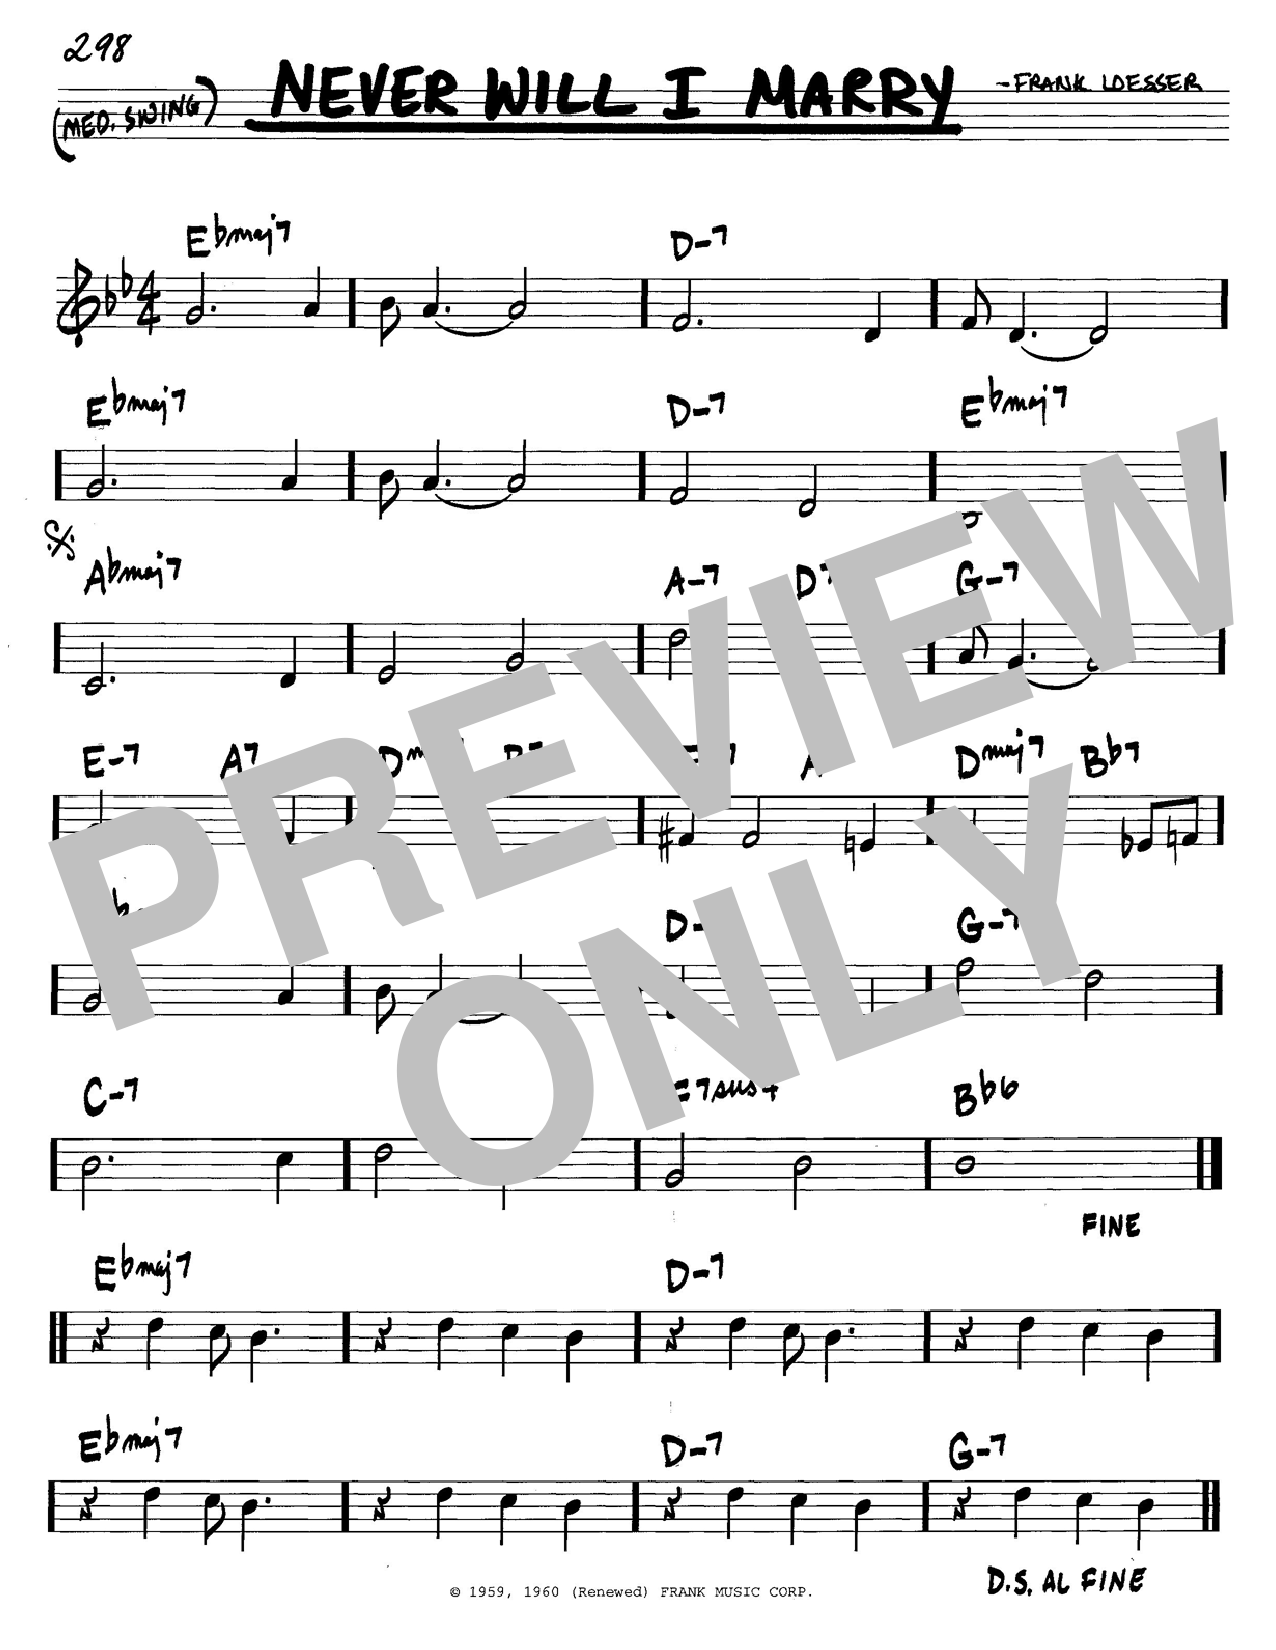 Frank Loesser Never Will I Marry sheet music notes and chords. Download Printable PDF.